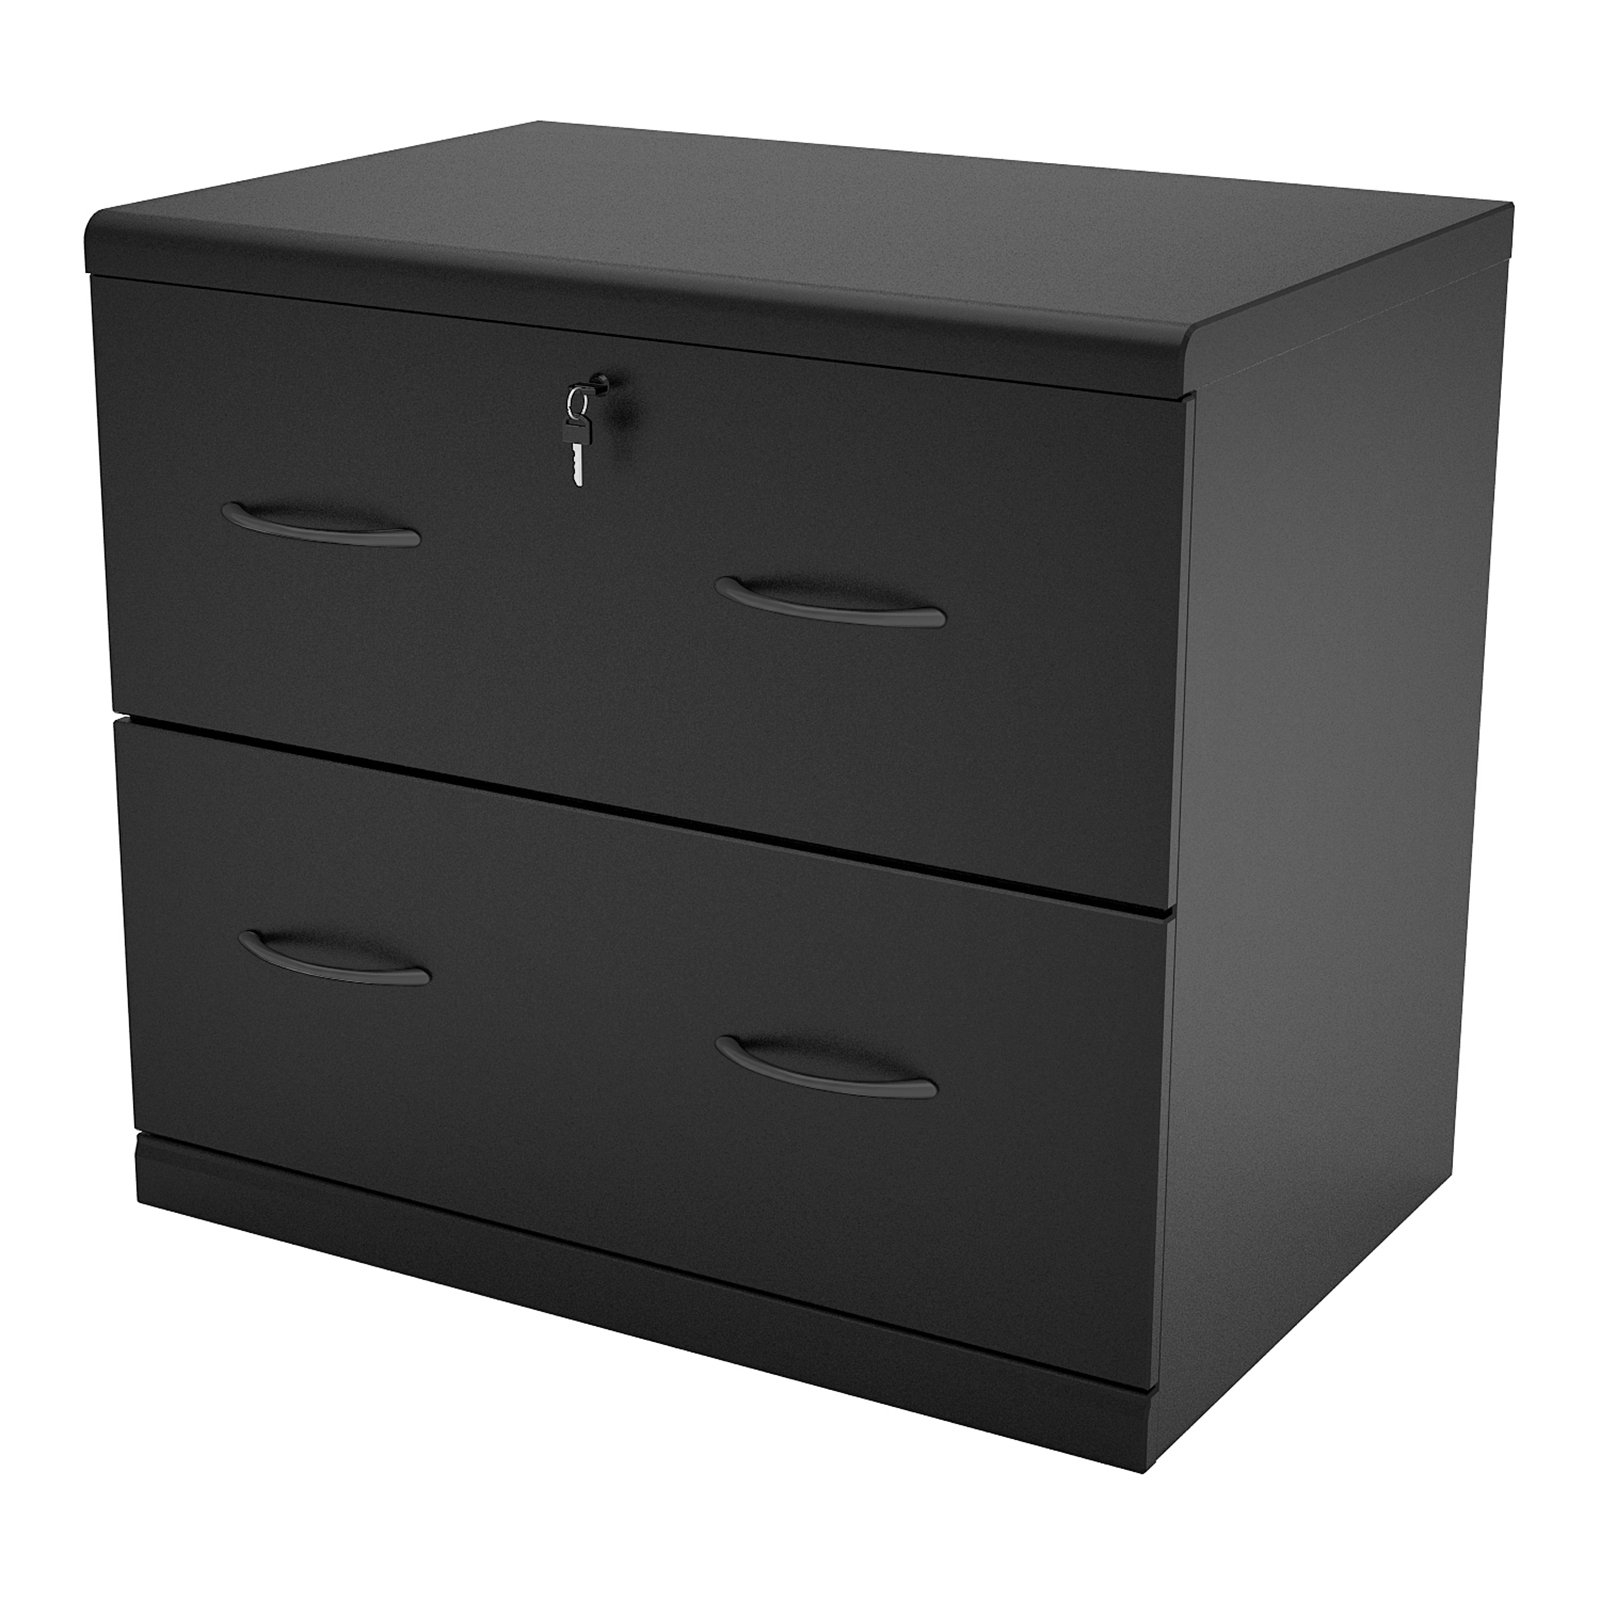 2 Drawer Lateral Wood Lockable Filing Cabinet Black pertaining to measurements 1600 X 1600